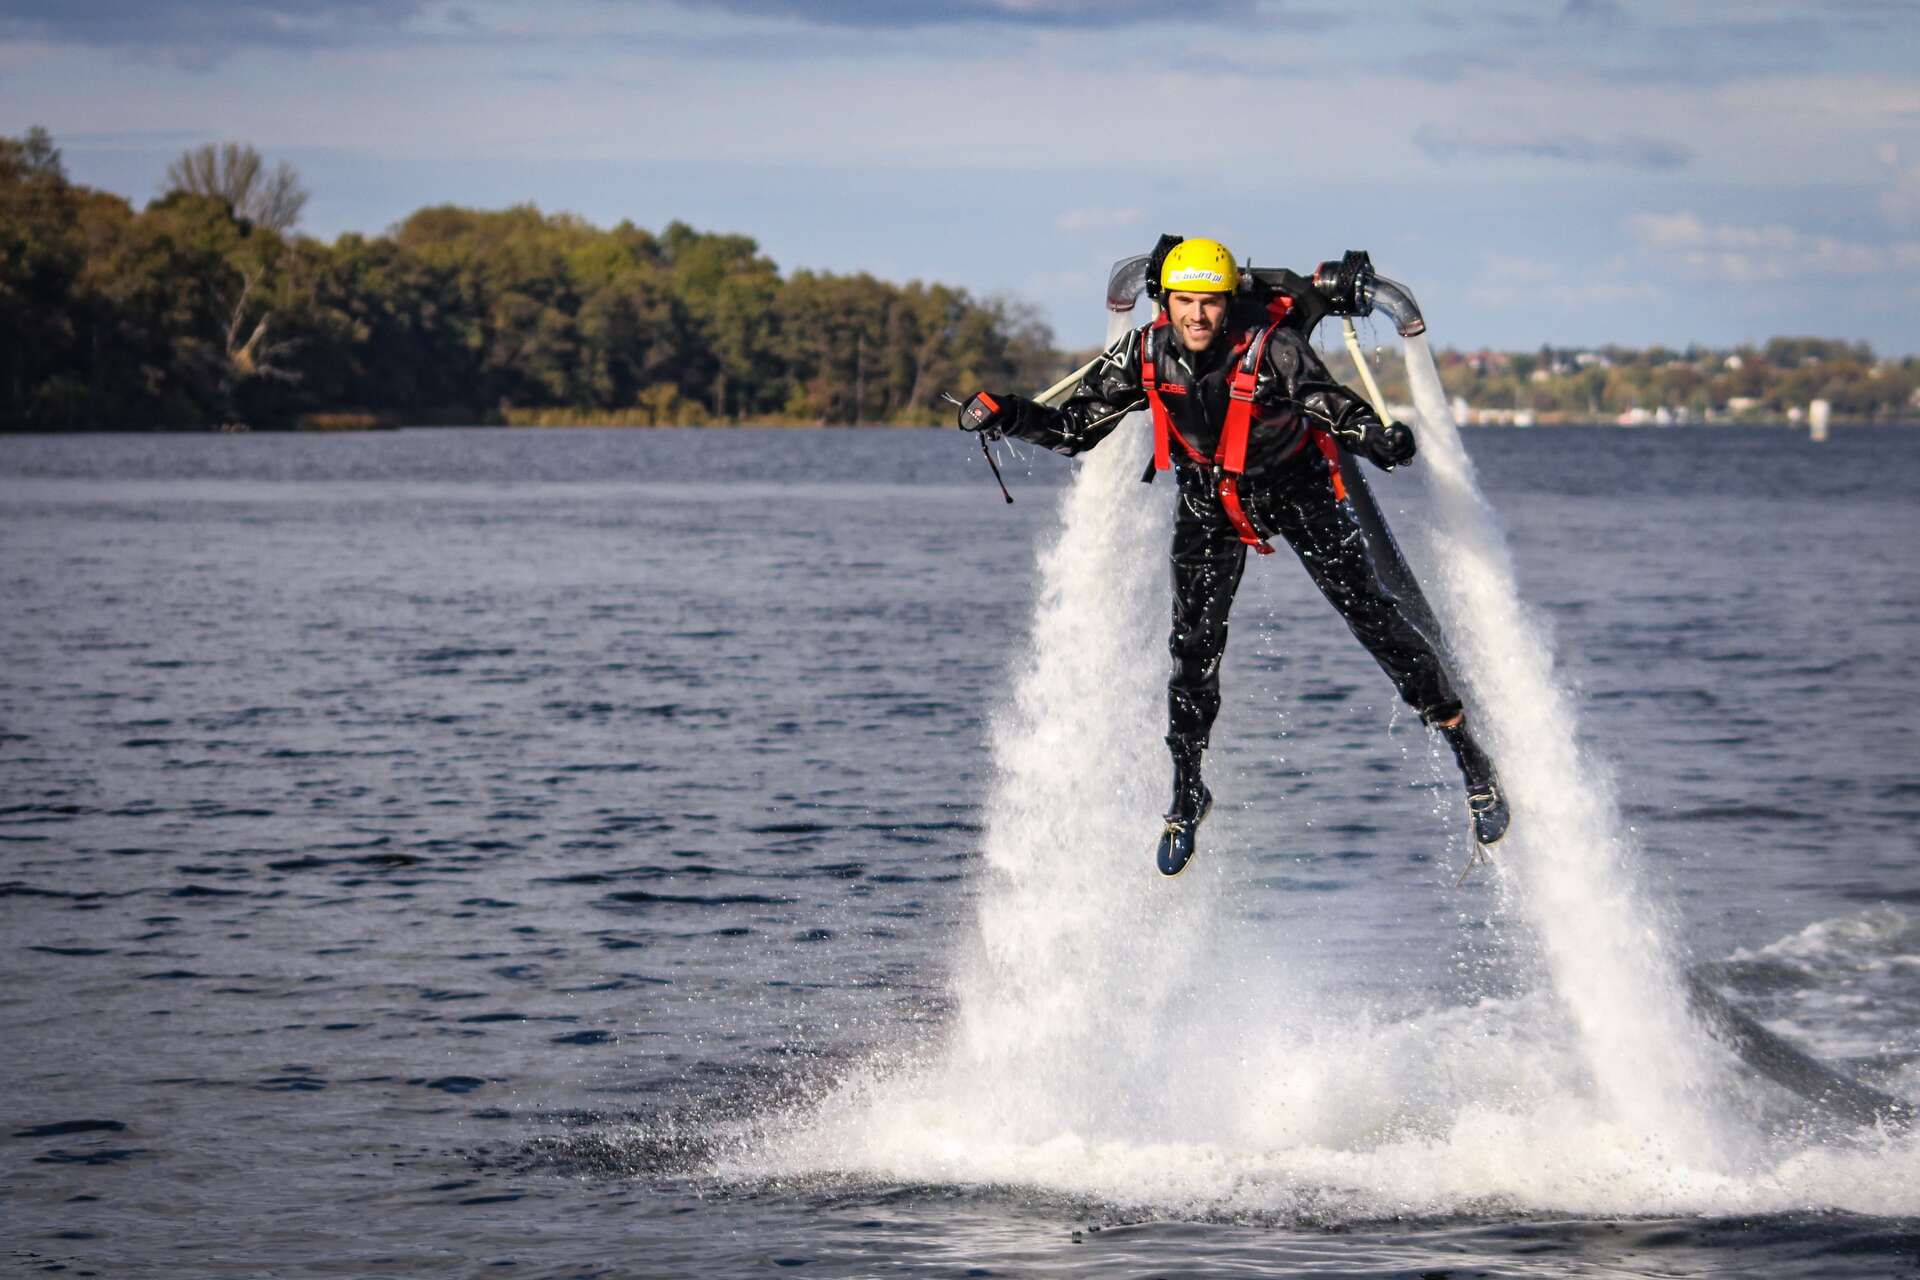 Jetpack - Things to do in Southampton